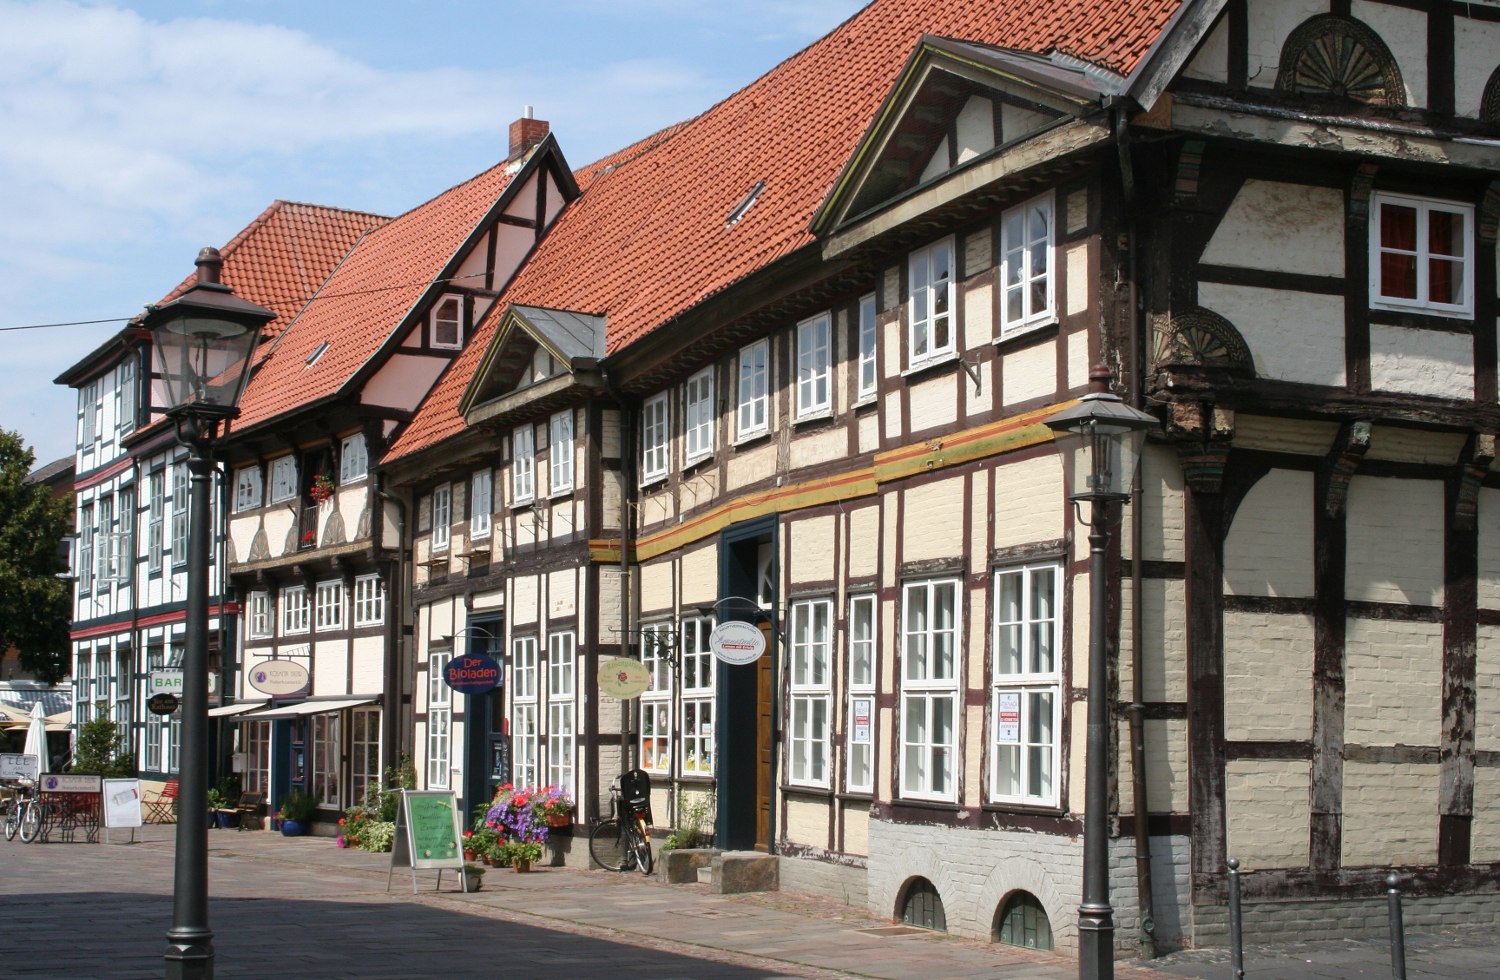 The beautiful half-timbered houses in the old town of Nienburg., © Mittelweser-Touristik GmbH